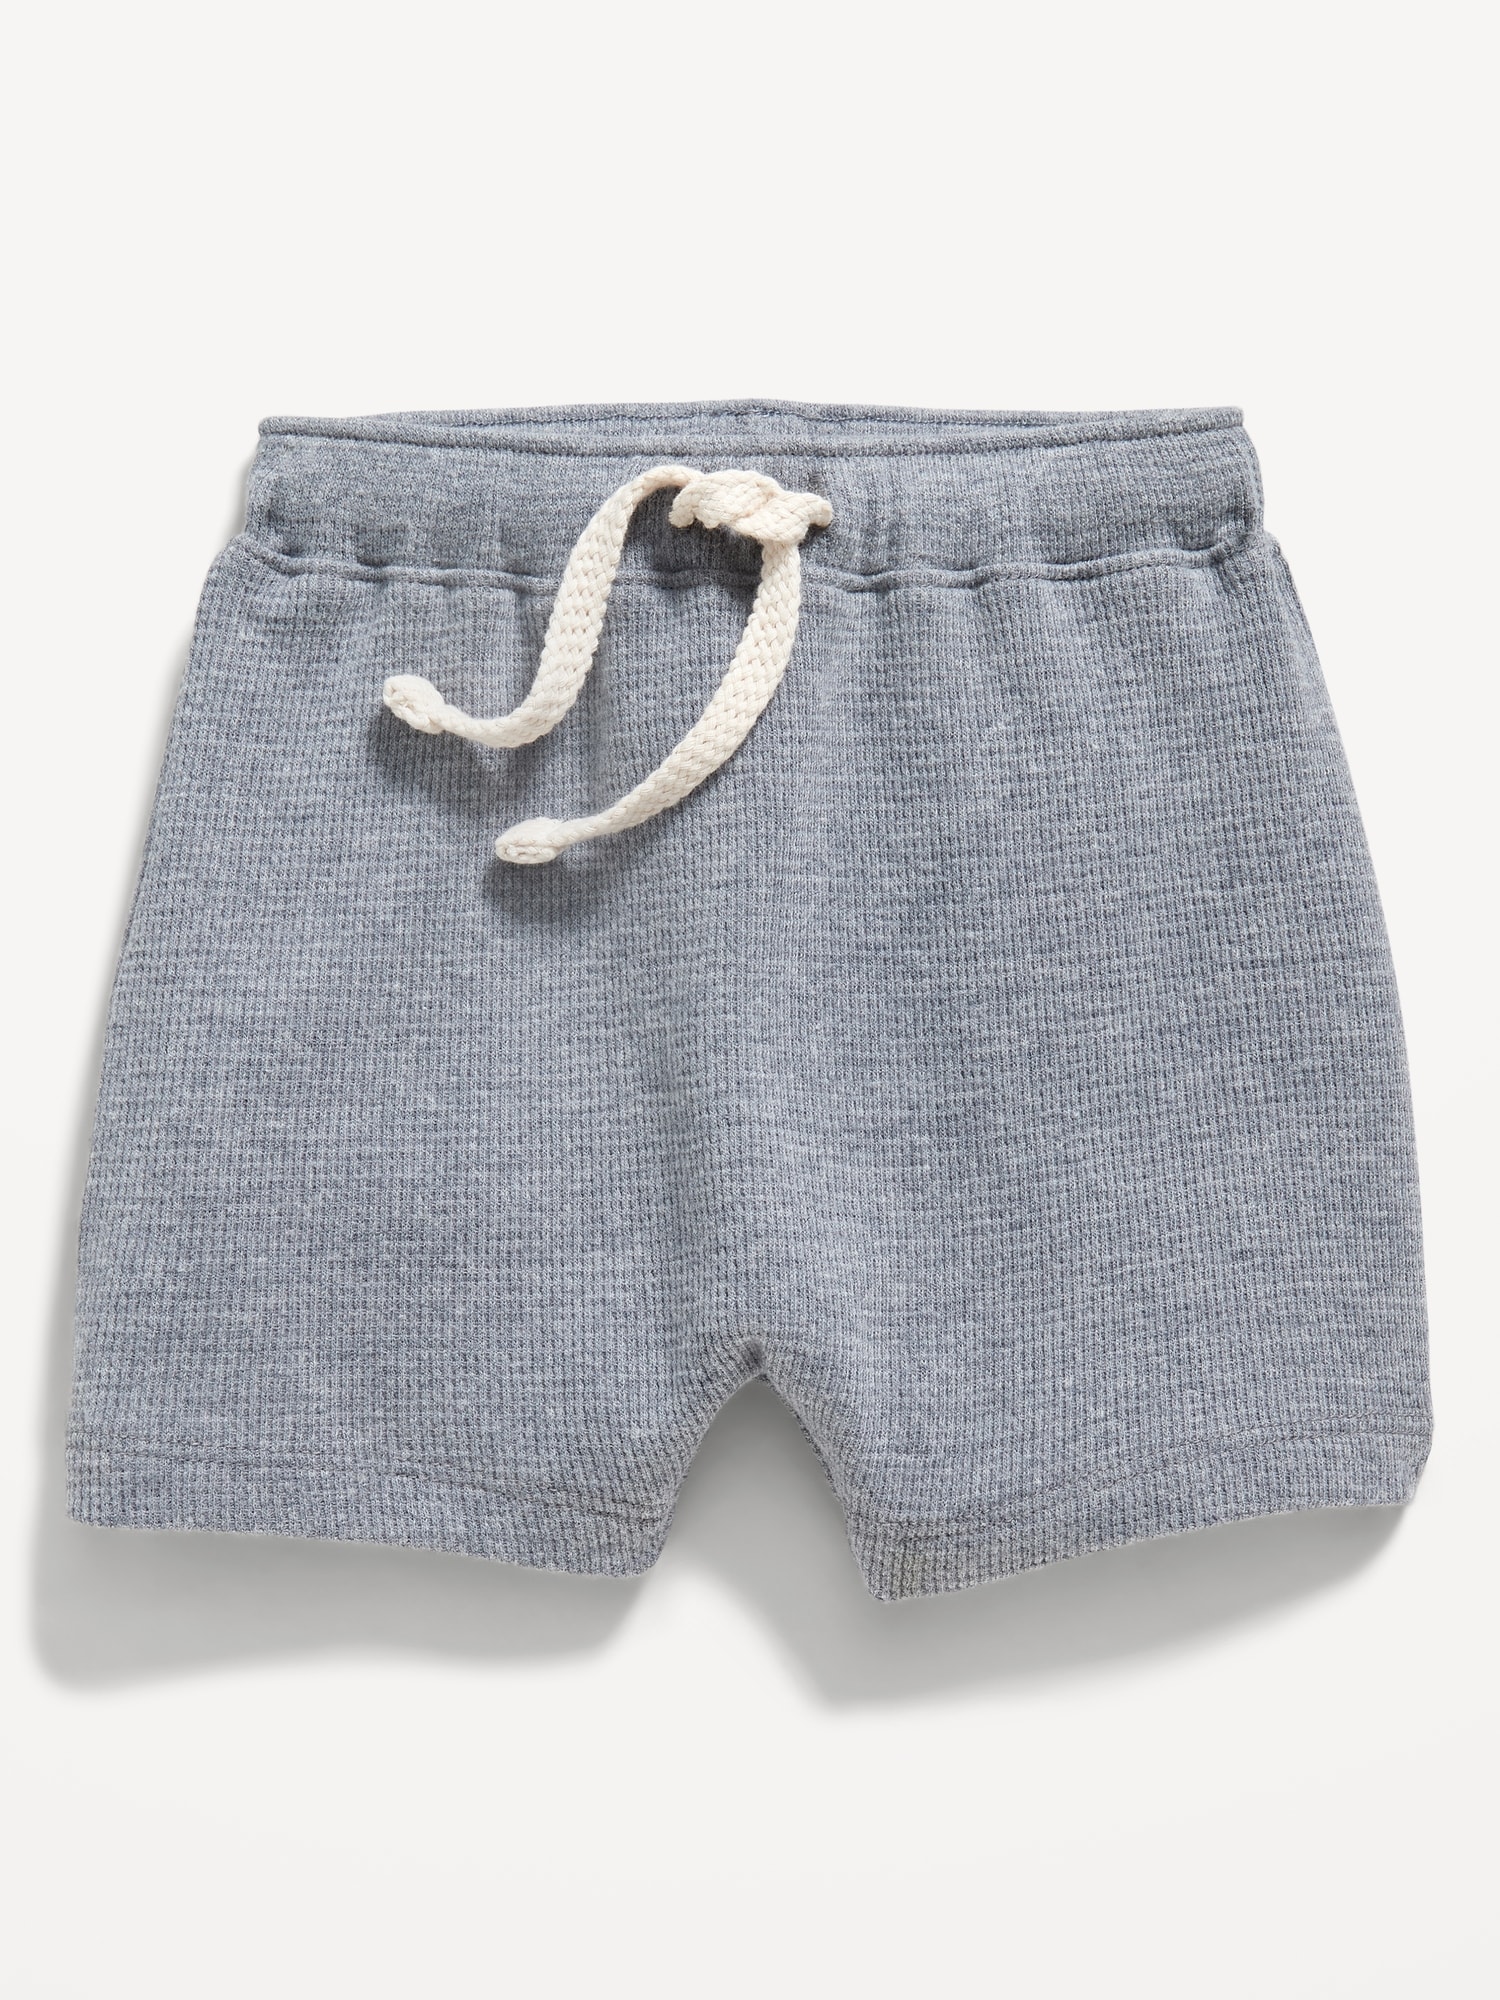 Unisex Thermal-Knit Pull-On Shorts for Baby